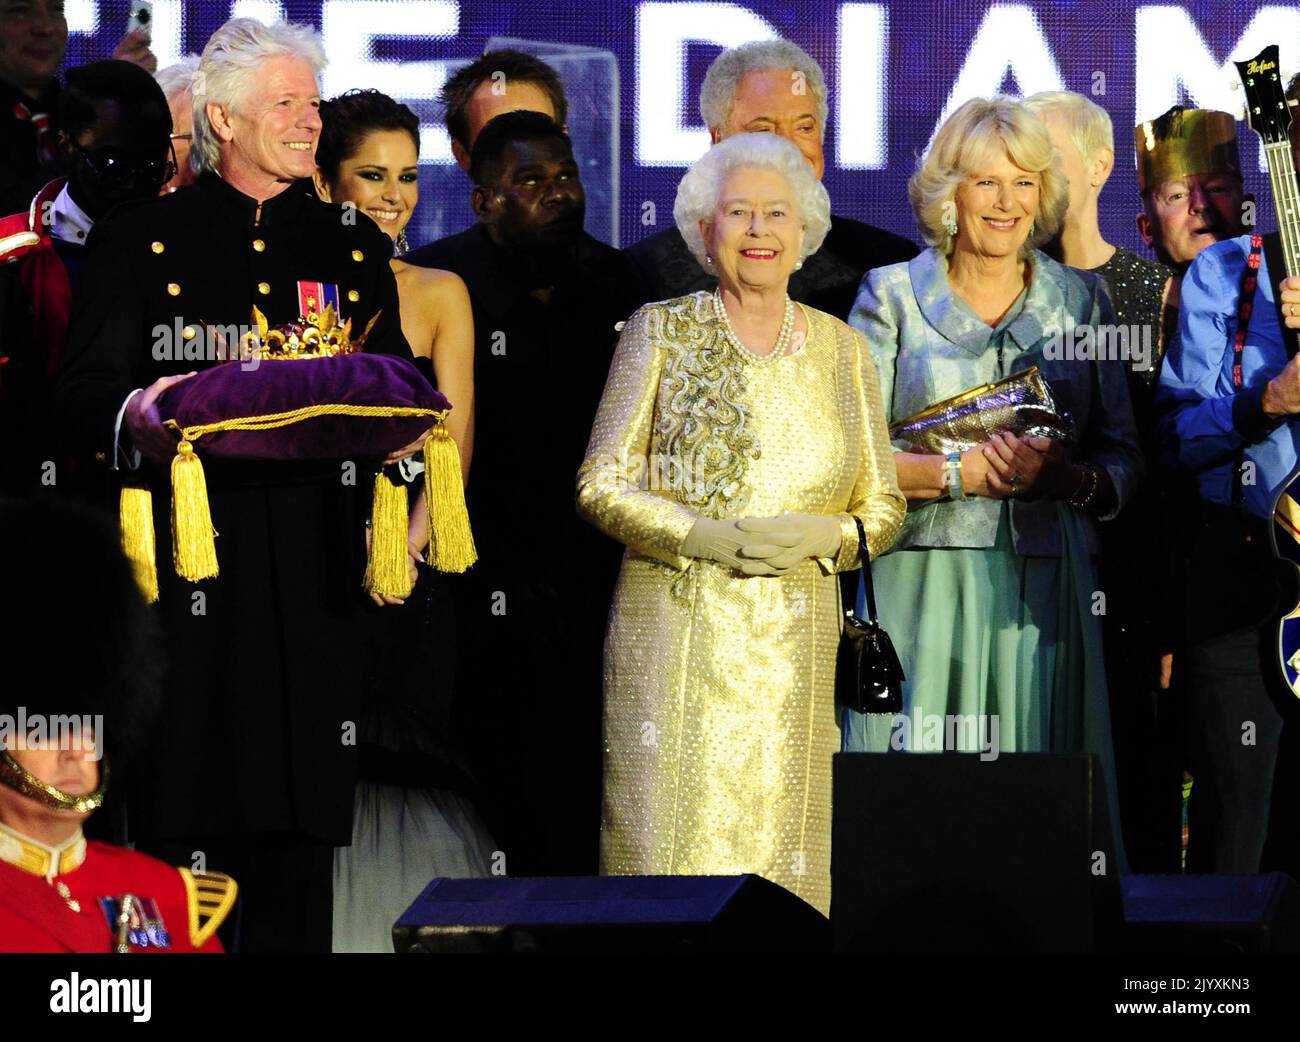 File photo dated 4/6/2012 of Queen Elizabeth II, wearing a gold lame dress by Angela Kelly with trimmings of antique gold and olive lace and Swarovski crystals, on stage outside Buckingham Palace during the Diamond Jubilee Concert. Elizabeth II was famed for her love of block colours and matching hats and her fashion became a legendary part of her role as monarch. The Queen was once described as 'power dressing in extremis' for using vibrant shades to make herself stand out from the crowd while her hats allowed her to be easily spotted but were small enough so her face was visible.Issue date:  Stock Photo